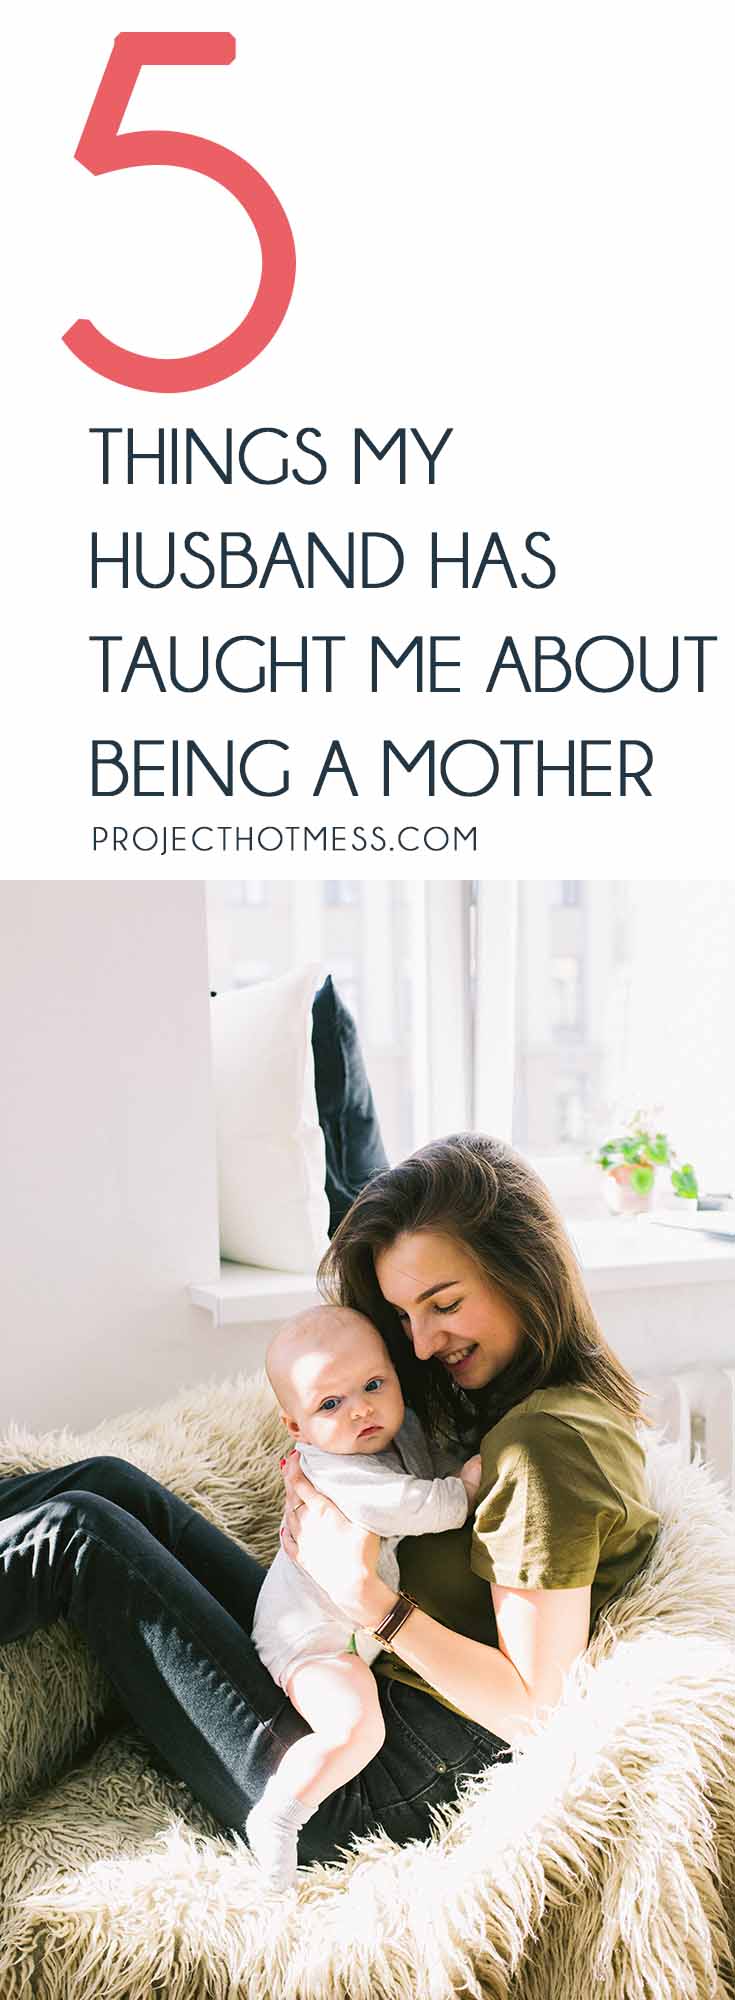 My husband has taught me more about being a mother than I ever imagined possible. Not only about the little things that make motherhood so amazing, but about myself as a mother too and has helped me become a better mother than I ever thought I would be.